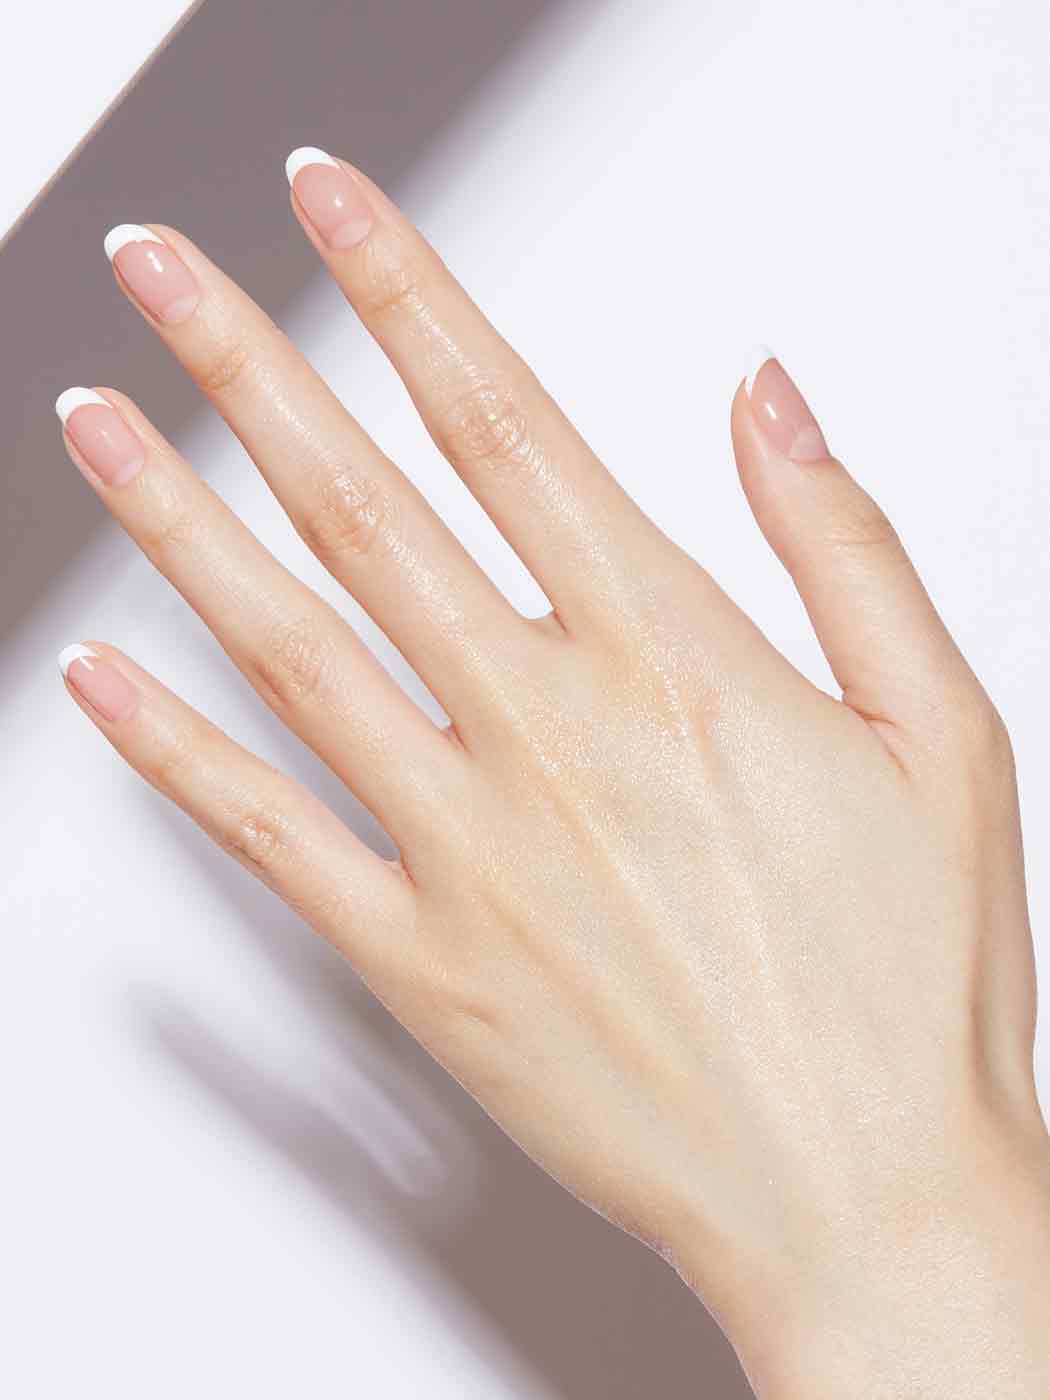 Gives your nails a healthy glow, Sheer, Light French